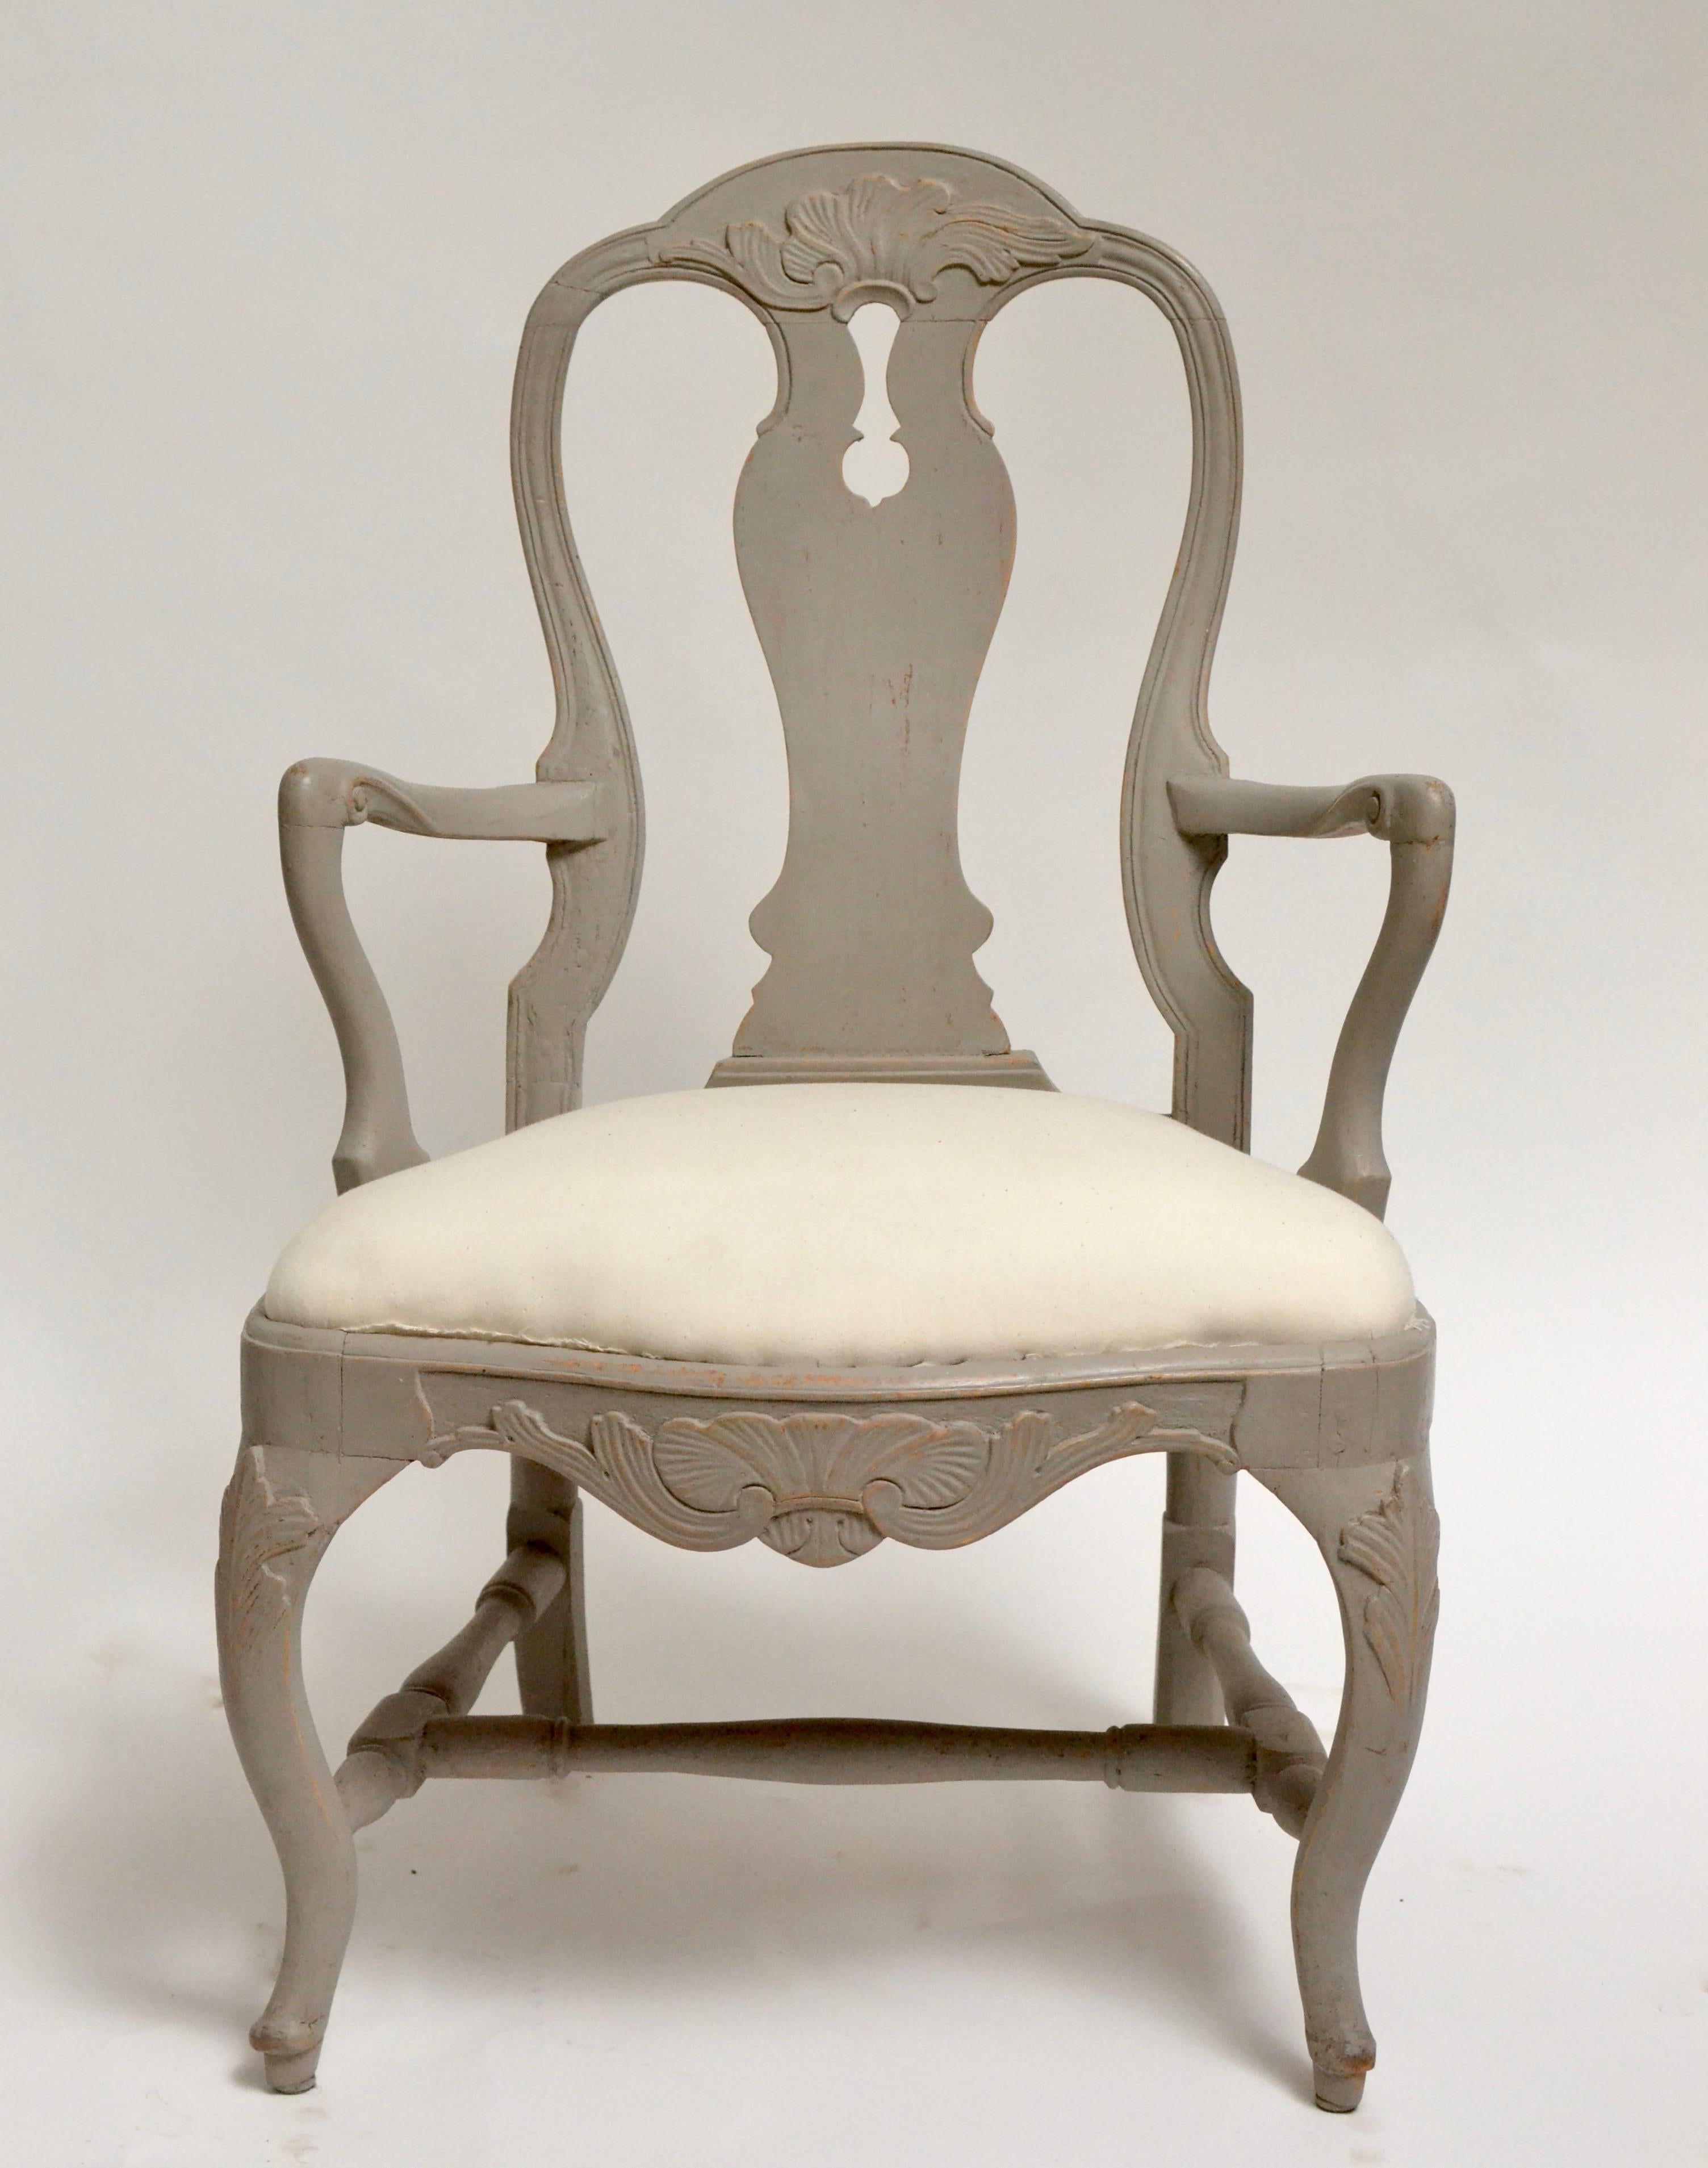 Painted Pair of Swedish 18th Century Rococo Armchairs